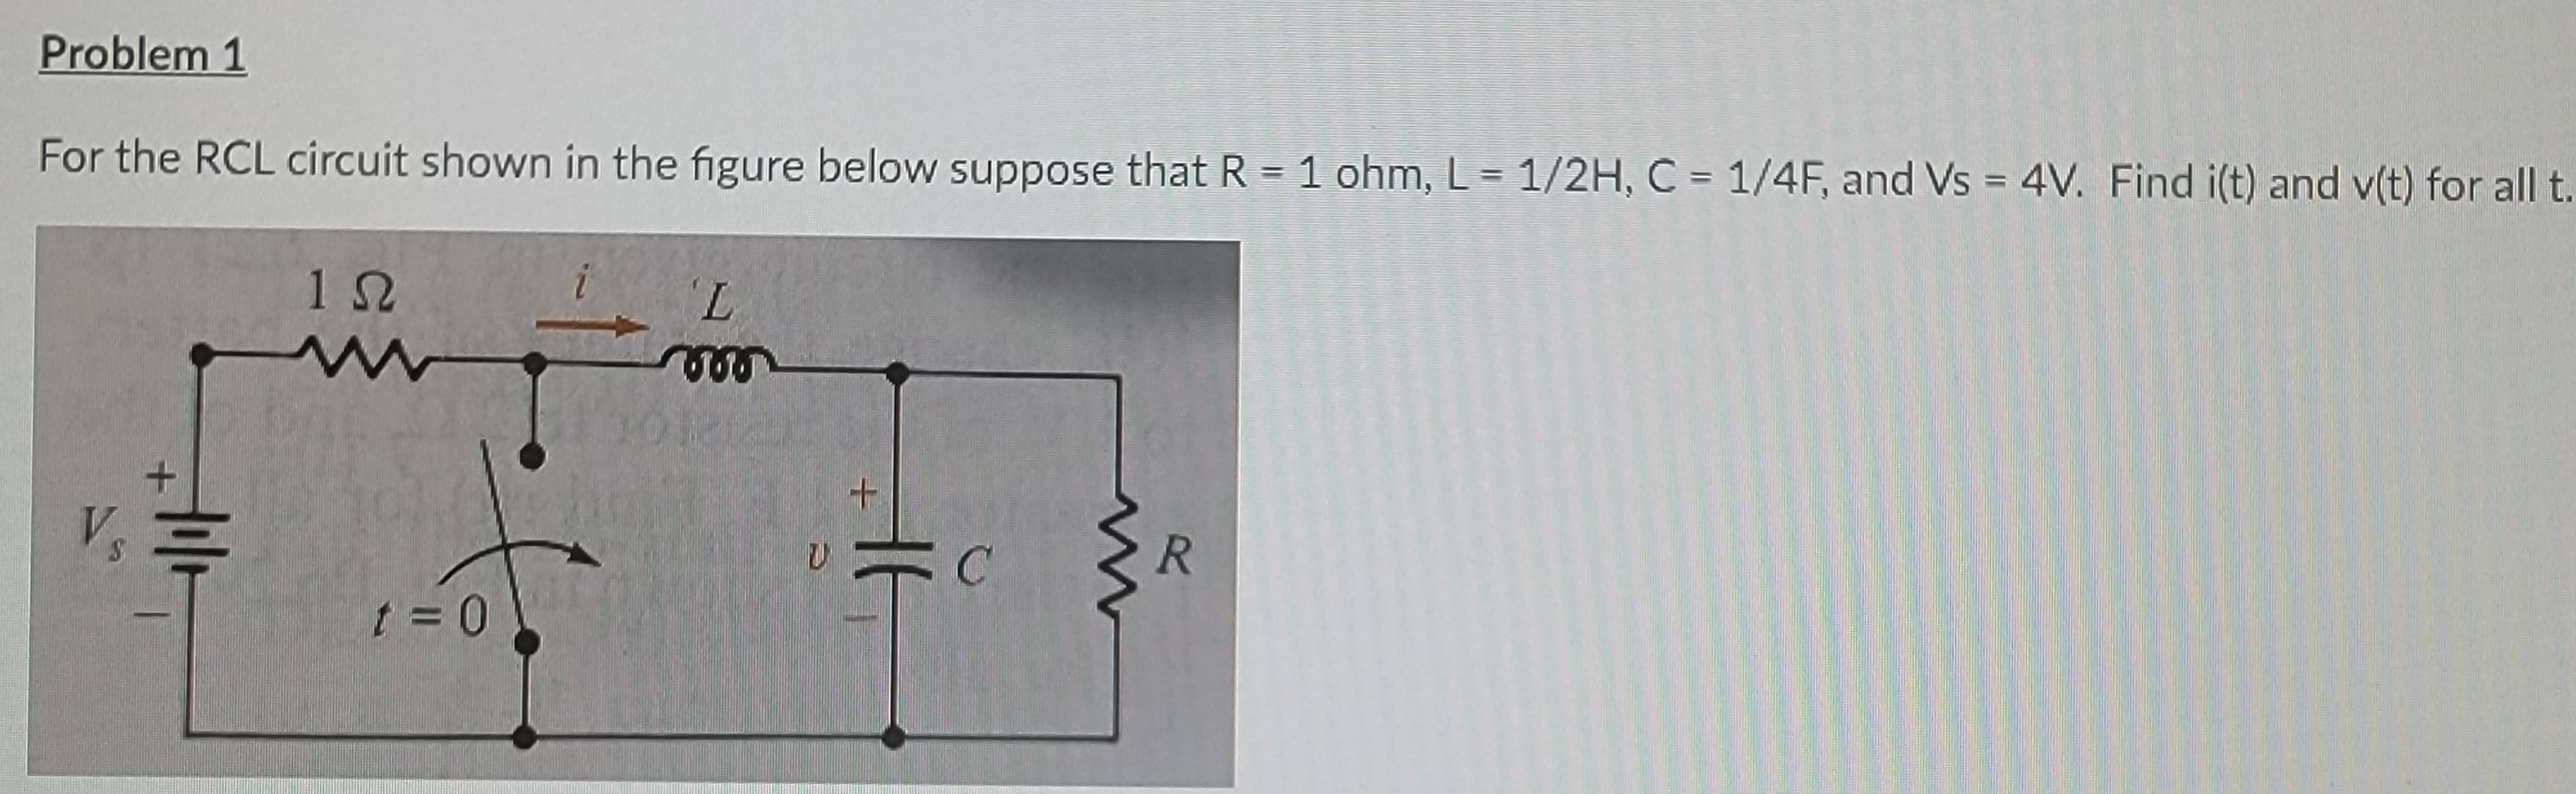 Problem 1
For the RCL circuit shown in the figure below suppose that R = 1 ohm, L = 1/2H, C = 1/4F, and Vs = 4V. Find i(t) and v(t) for all t.
1Ω
www
t=0
'L
665
+
UC
www
R